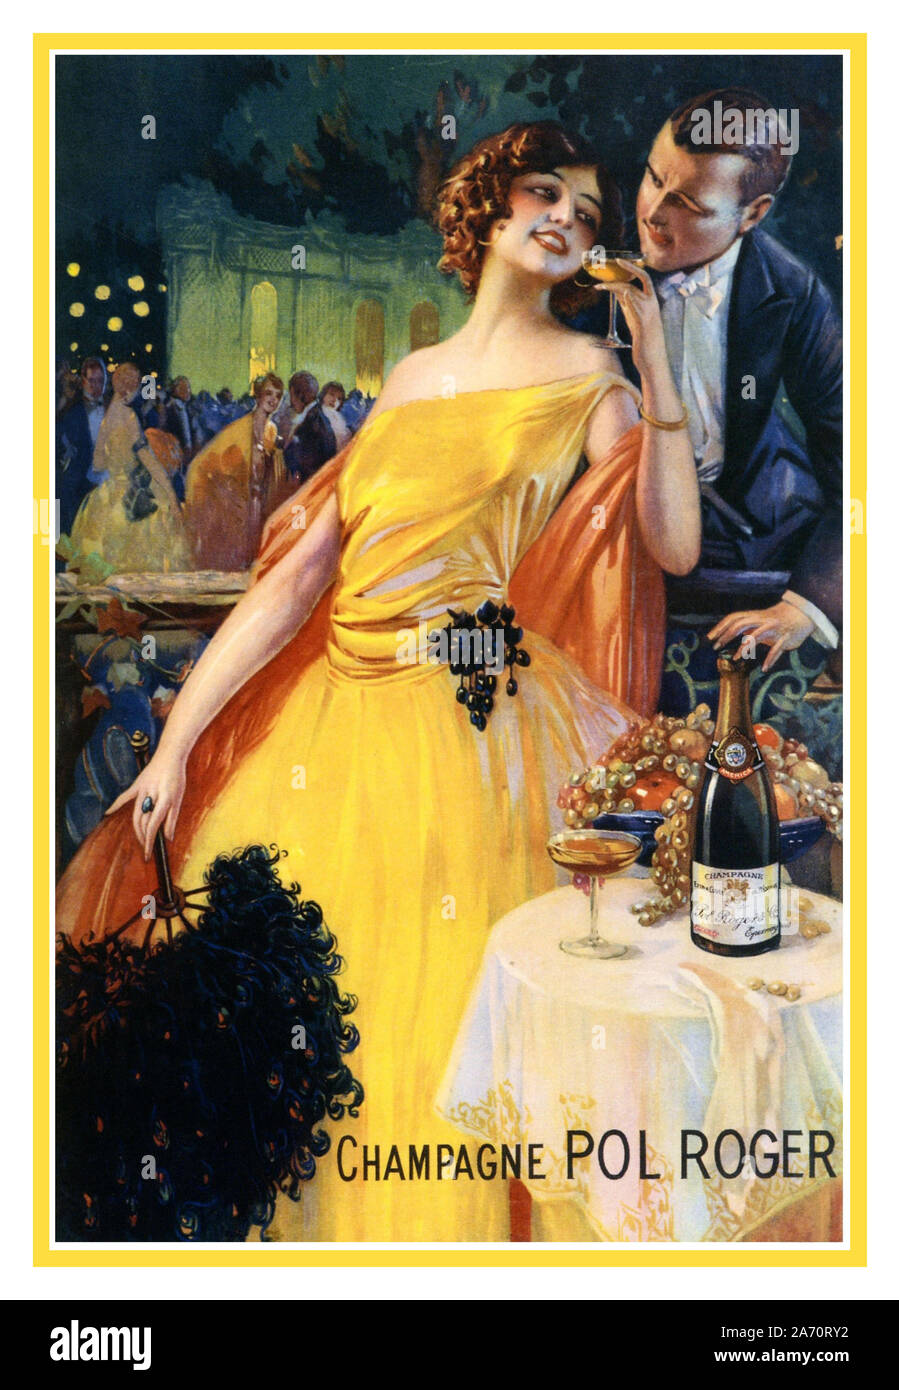 Vintage Champagne Pol Roger French advertising poster 1920 by Gaspar Camps illustrating a luxury lifestyle France Stock Photo